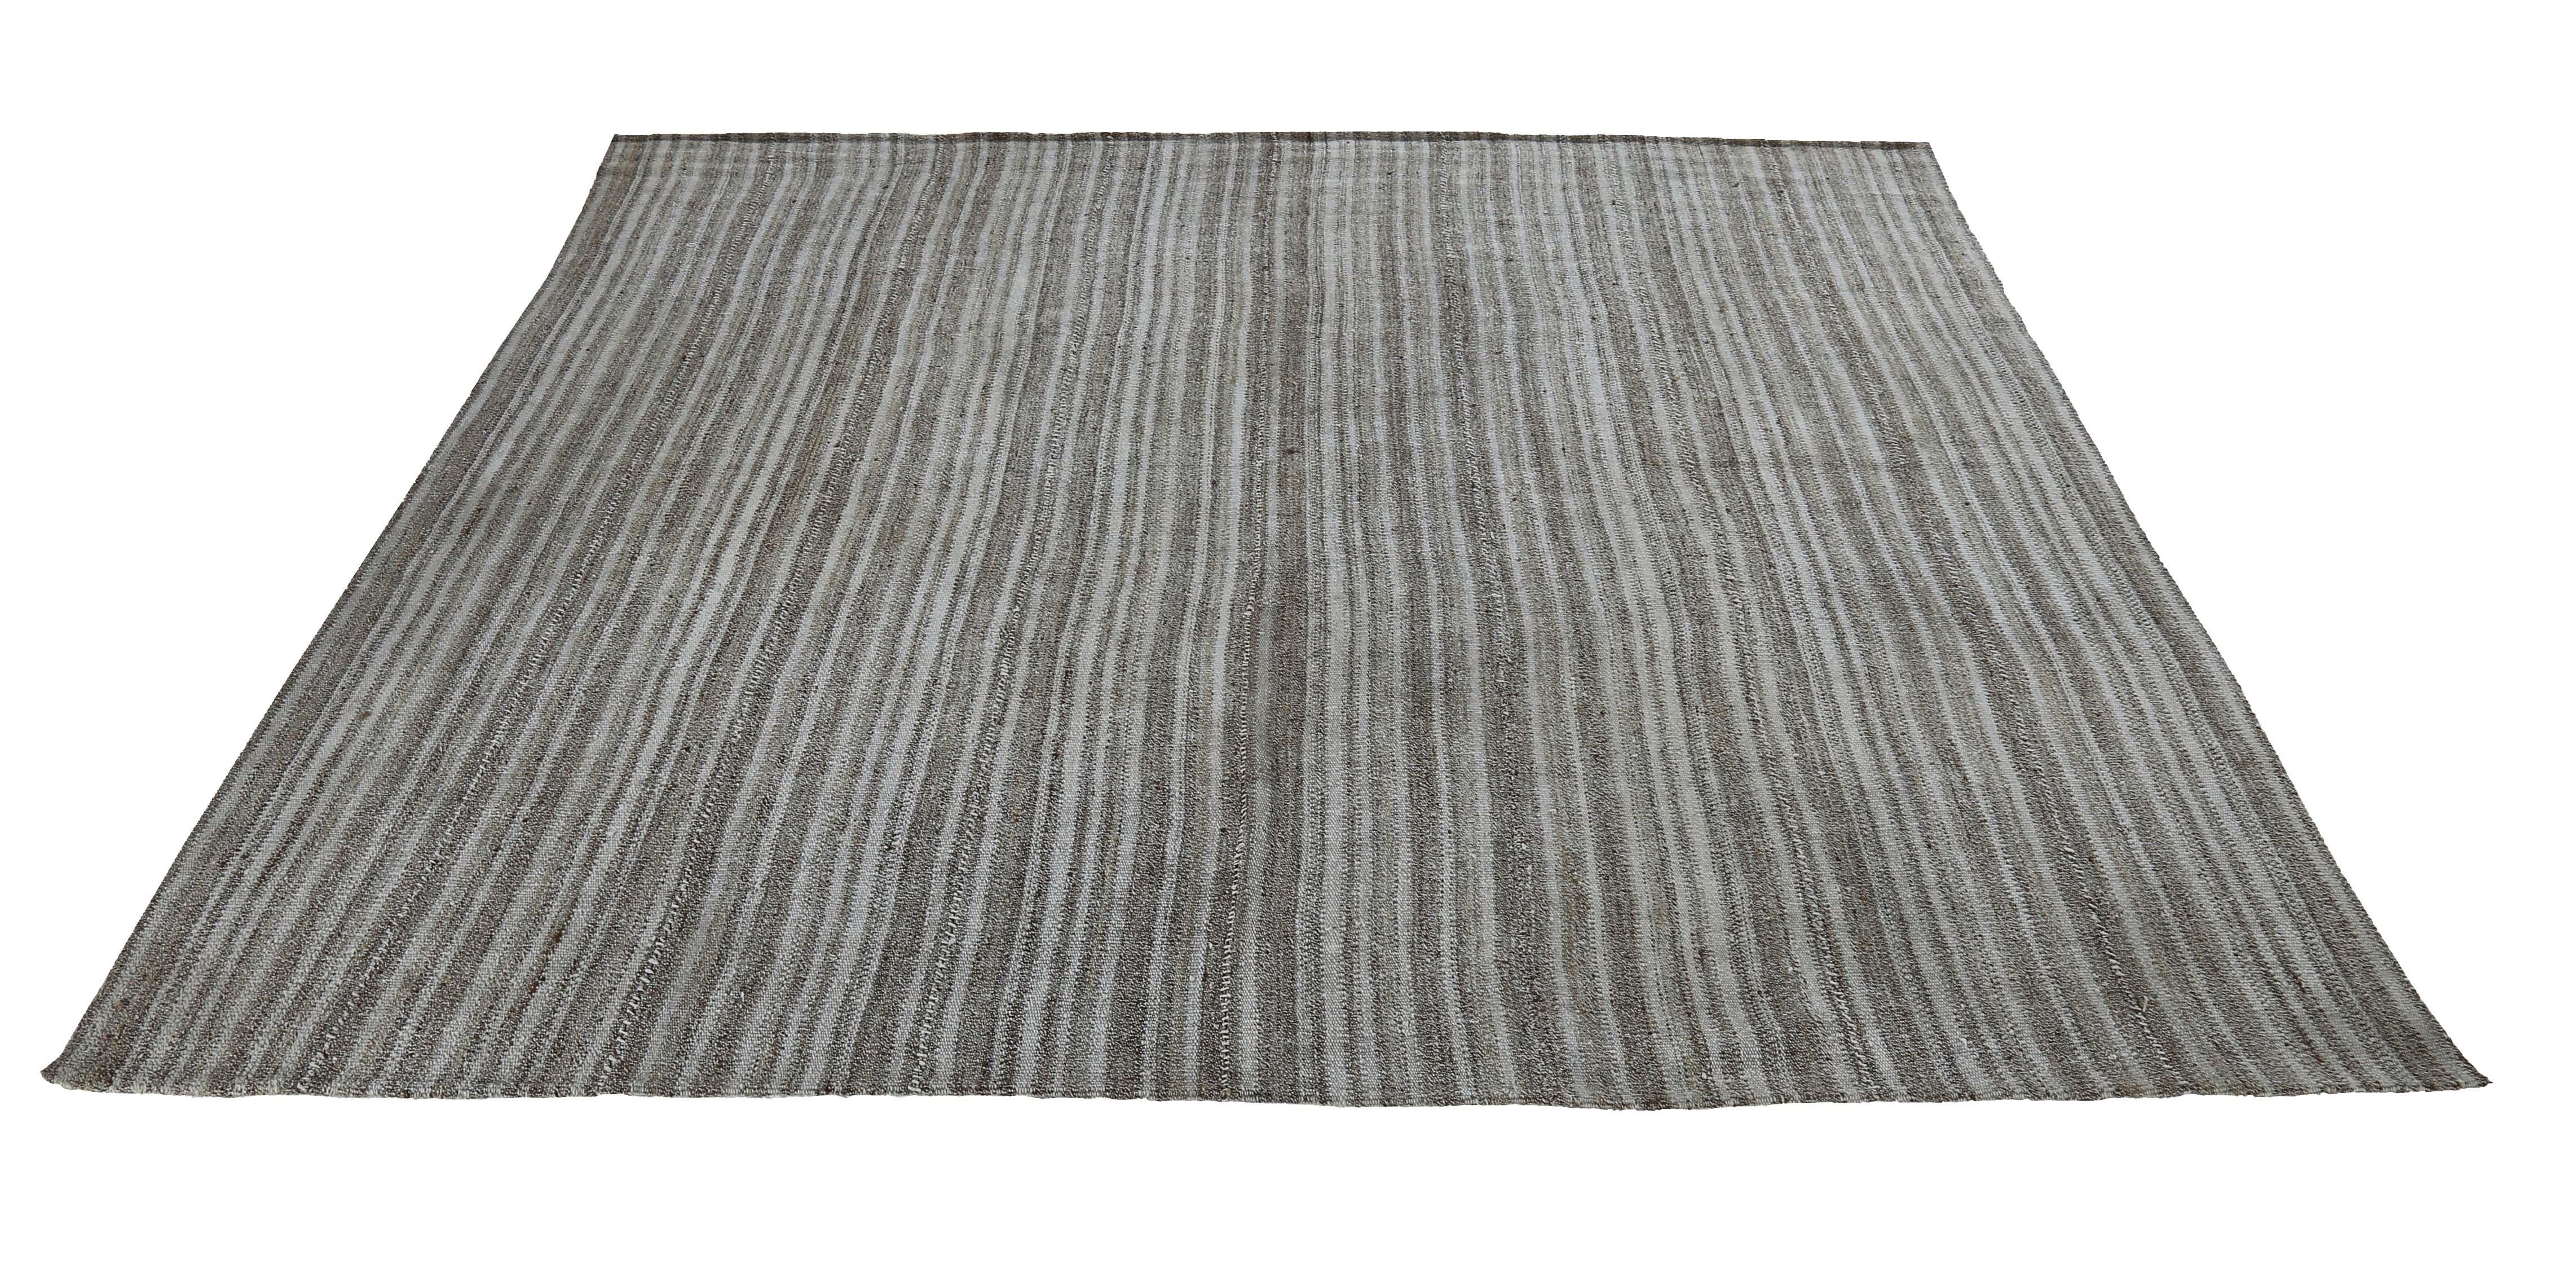 Modern Turkish rug handwoven from the finest sheep’s wool and colored with all-natural vegetable dyes that are safe for humans and pets. It’s a traditional Kilim flat-weave design featuring a gray field with brown pencil stripes. It’s a stunning